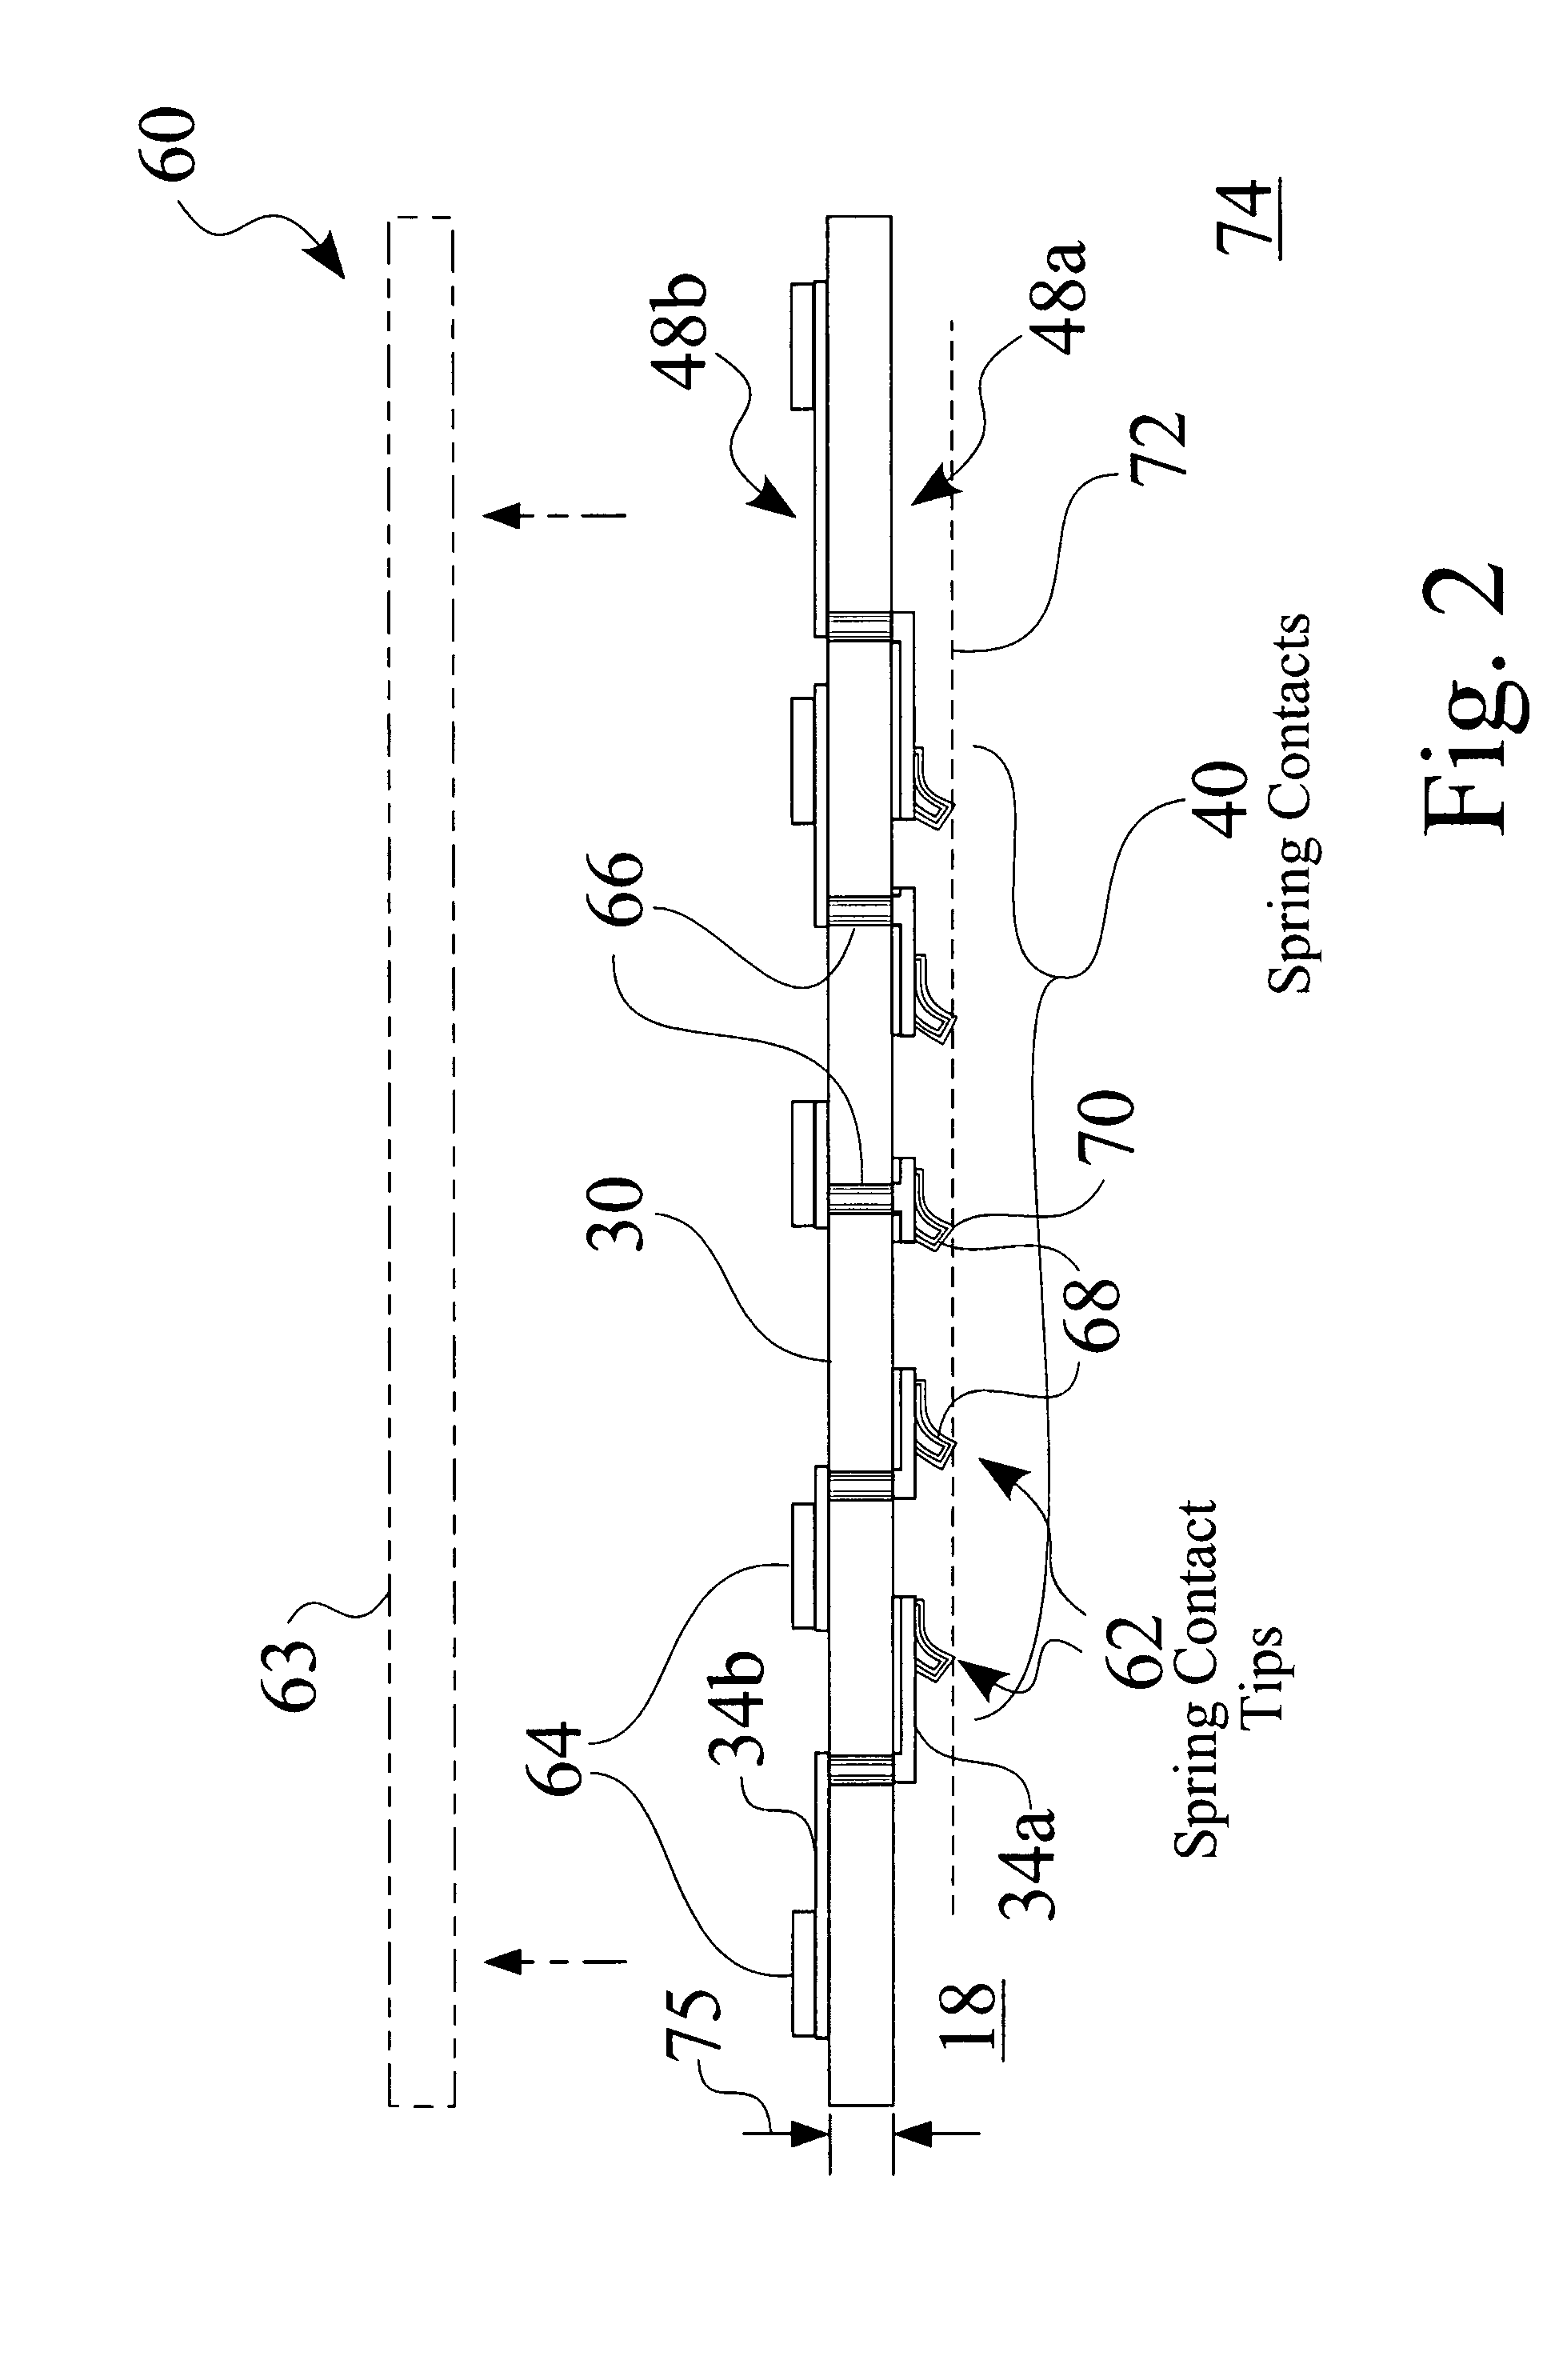 High density interconnect system for IC packages and interconnect assemblies